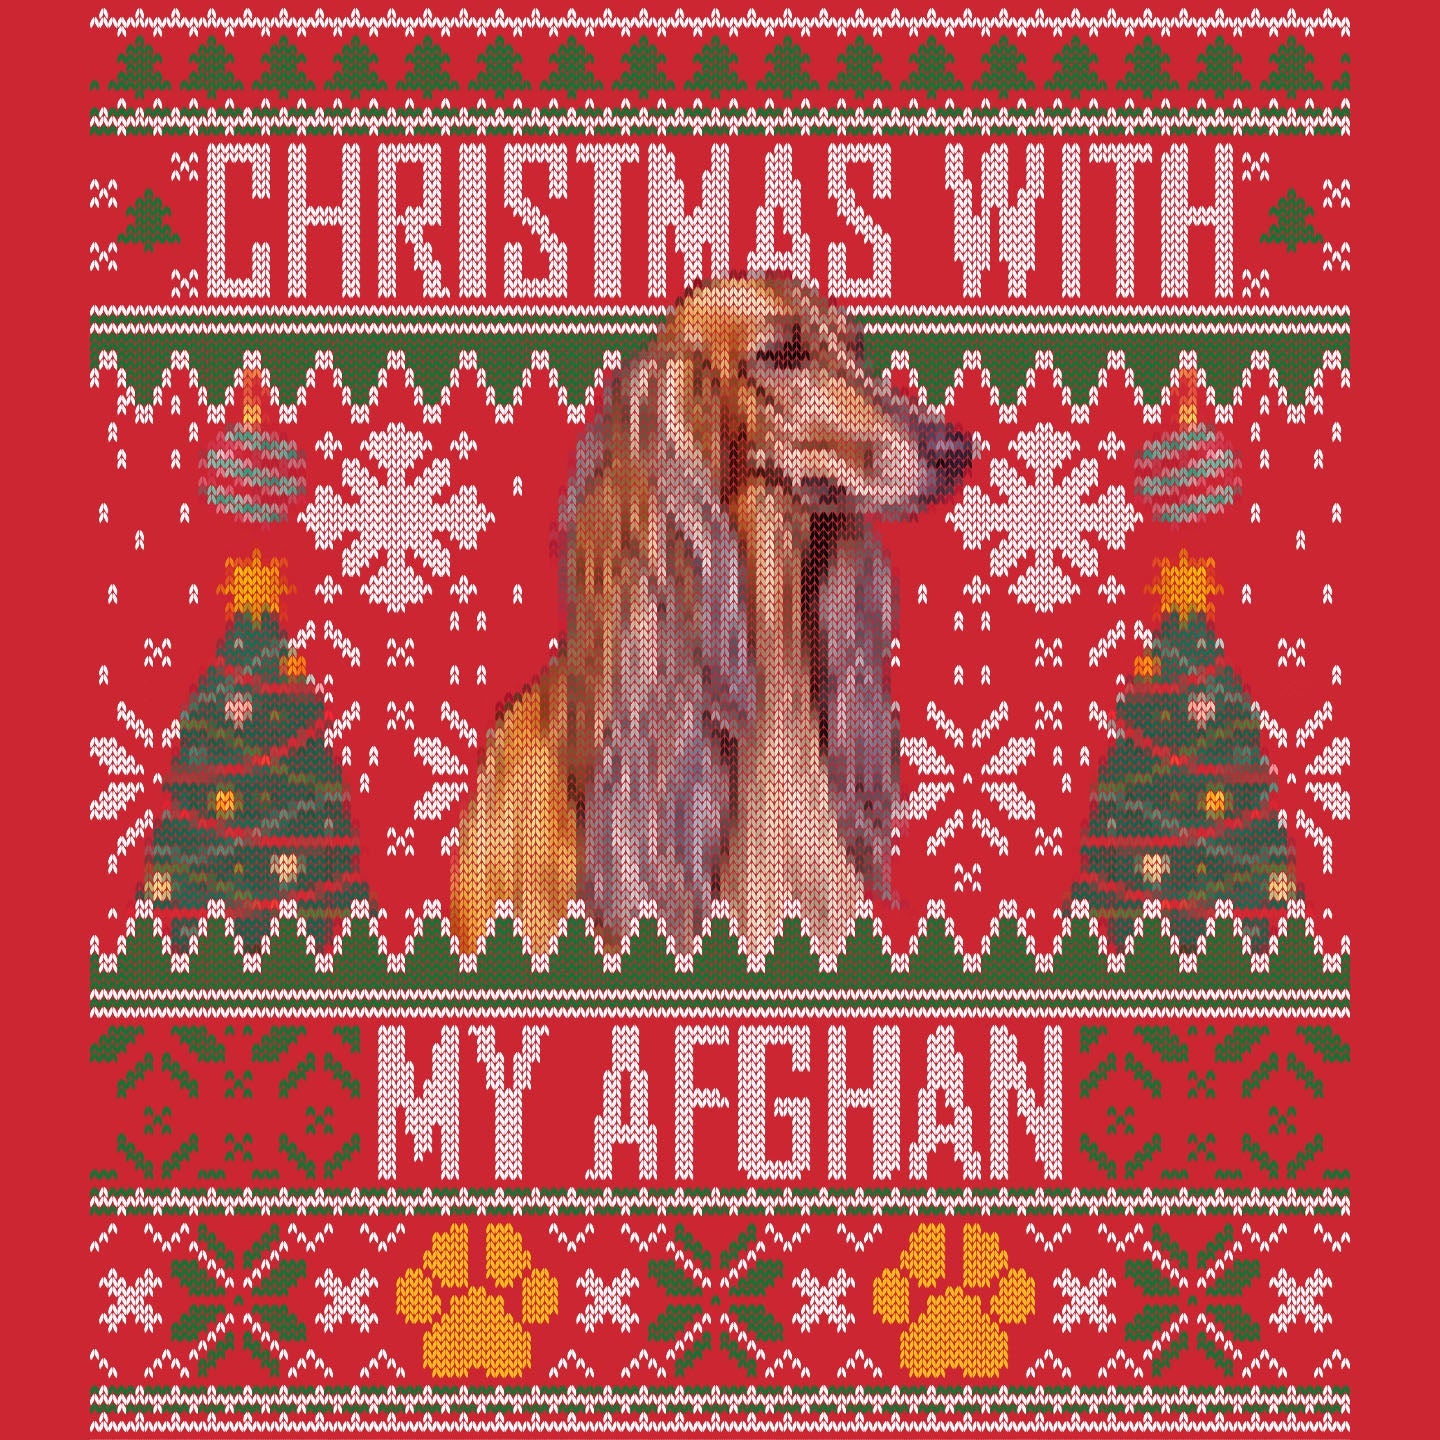 Ugly Sweater Christmas with My Afghan Hound - Adult Unisex Long Sleeve T-Shirt